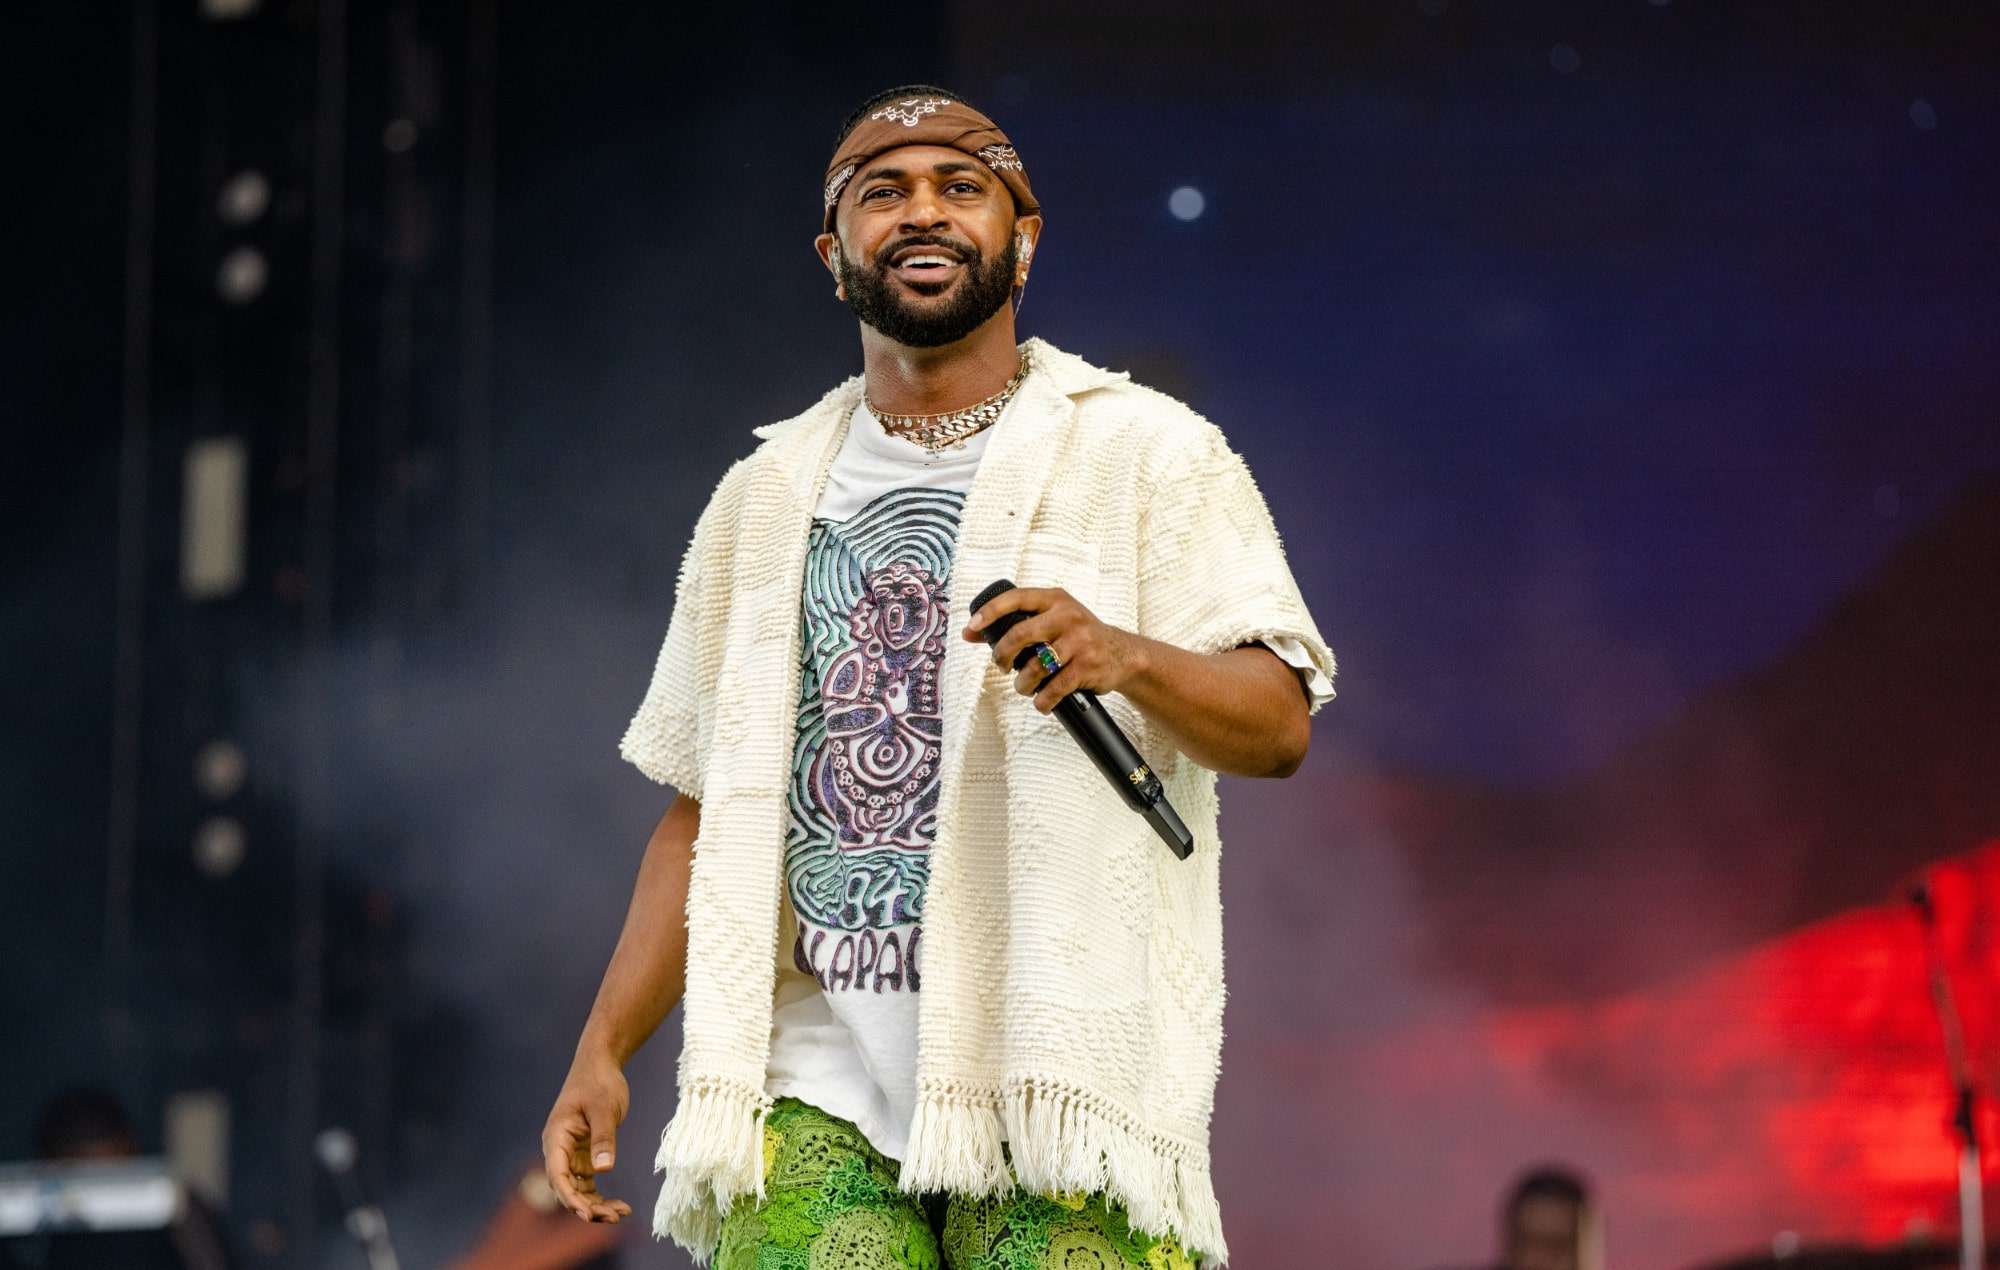 Big Sean image from stage show